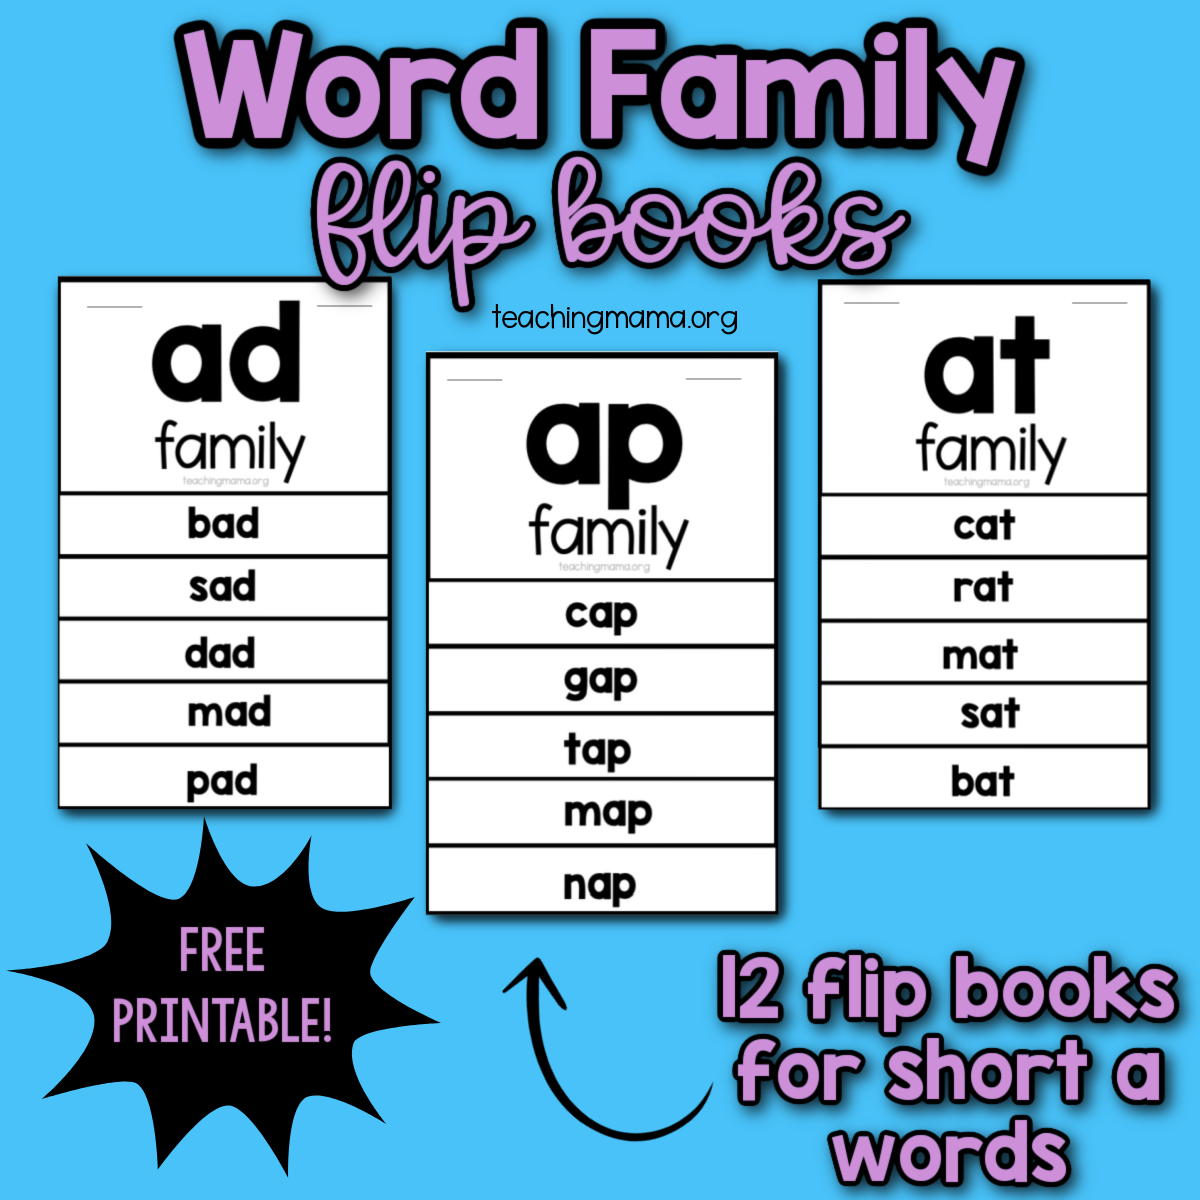 Word Family Books Free Printable Printable Form Templates and Letter